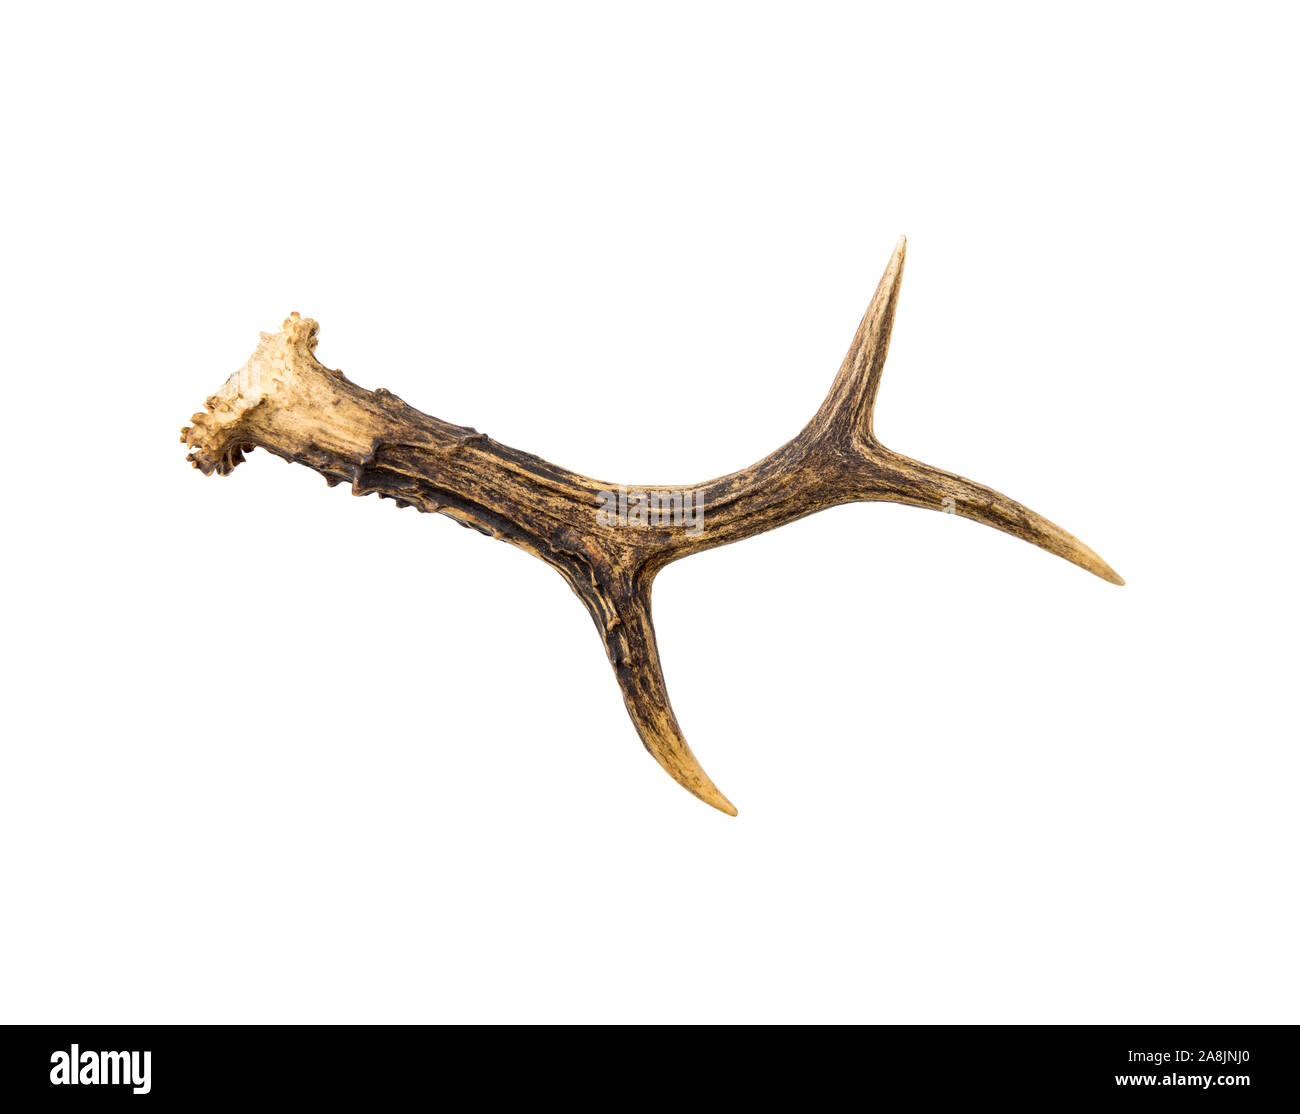 One European roe deer (chevreuil) antler found in forest, isolated on white background. A bit weathered. Stock Photo